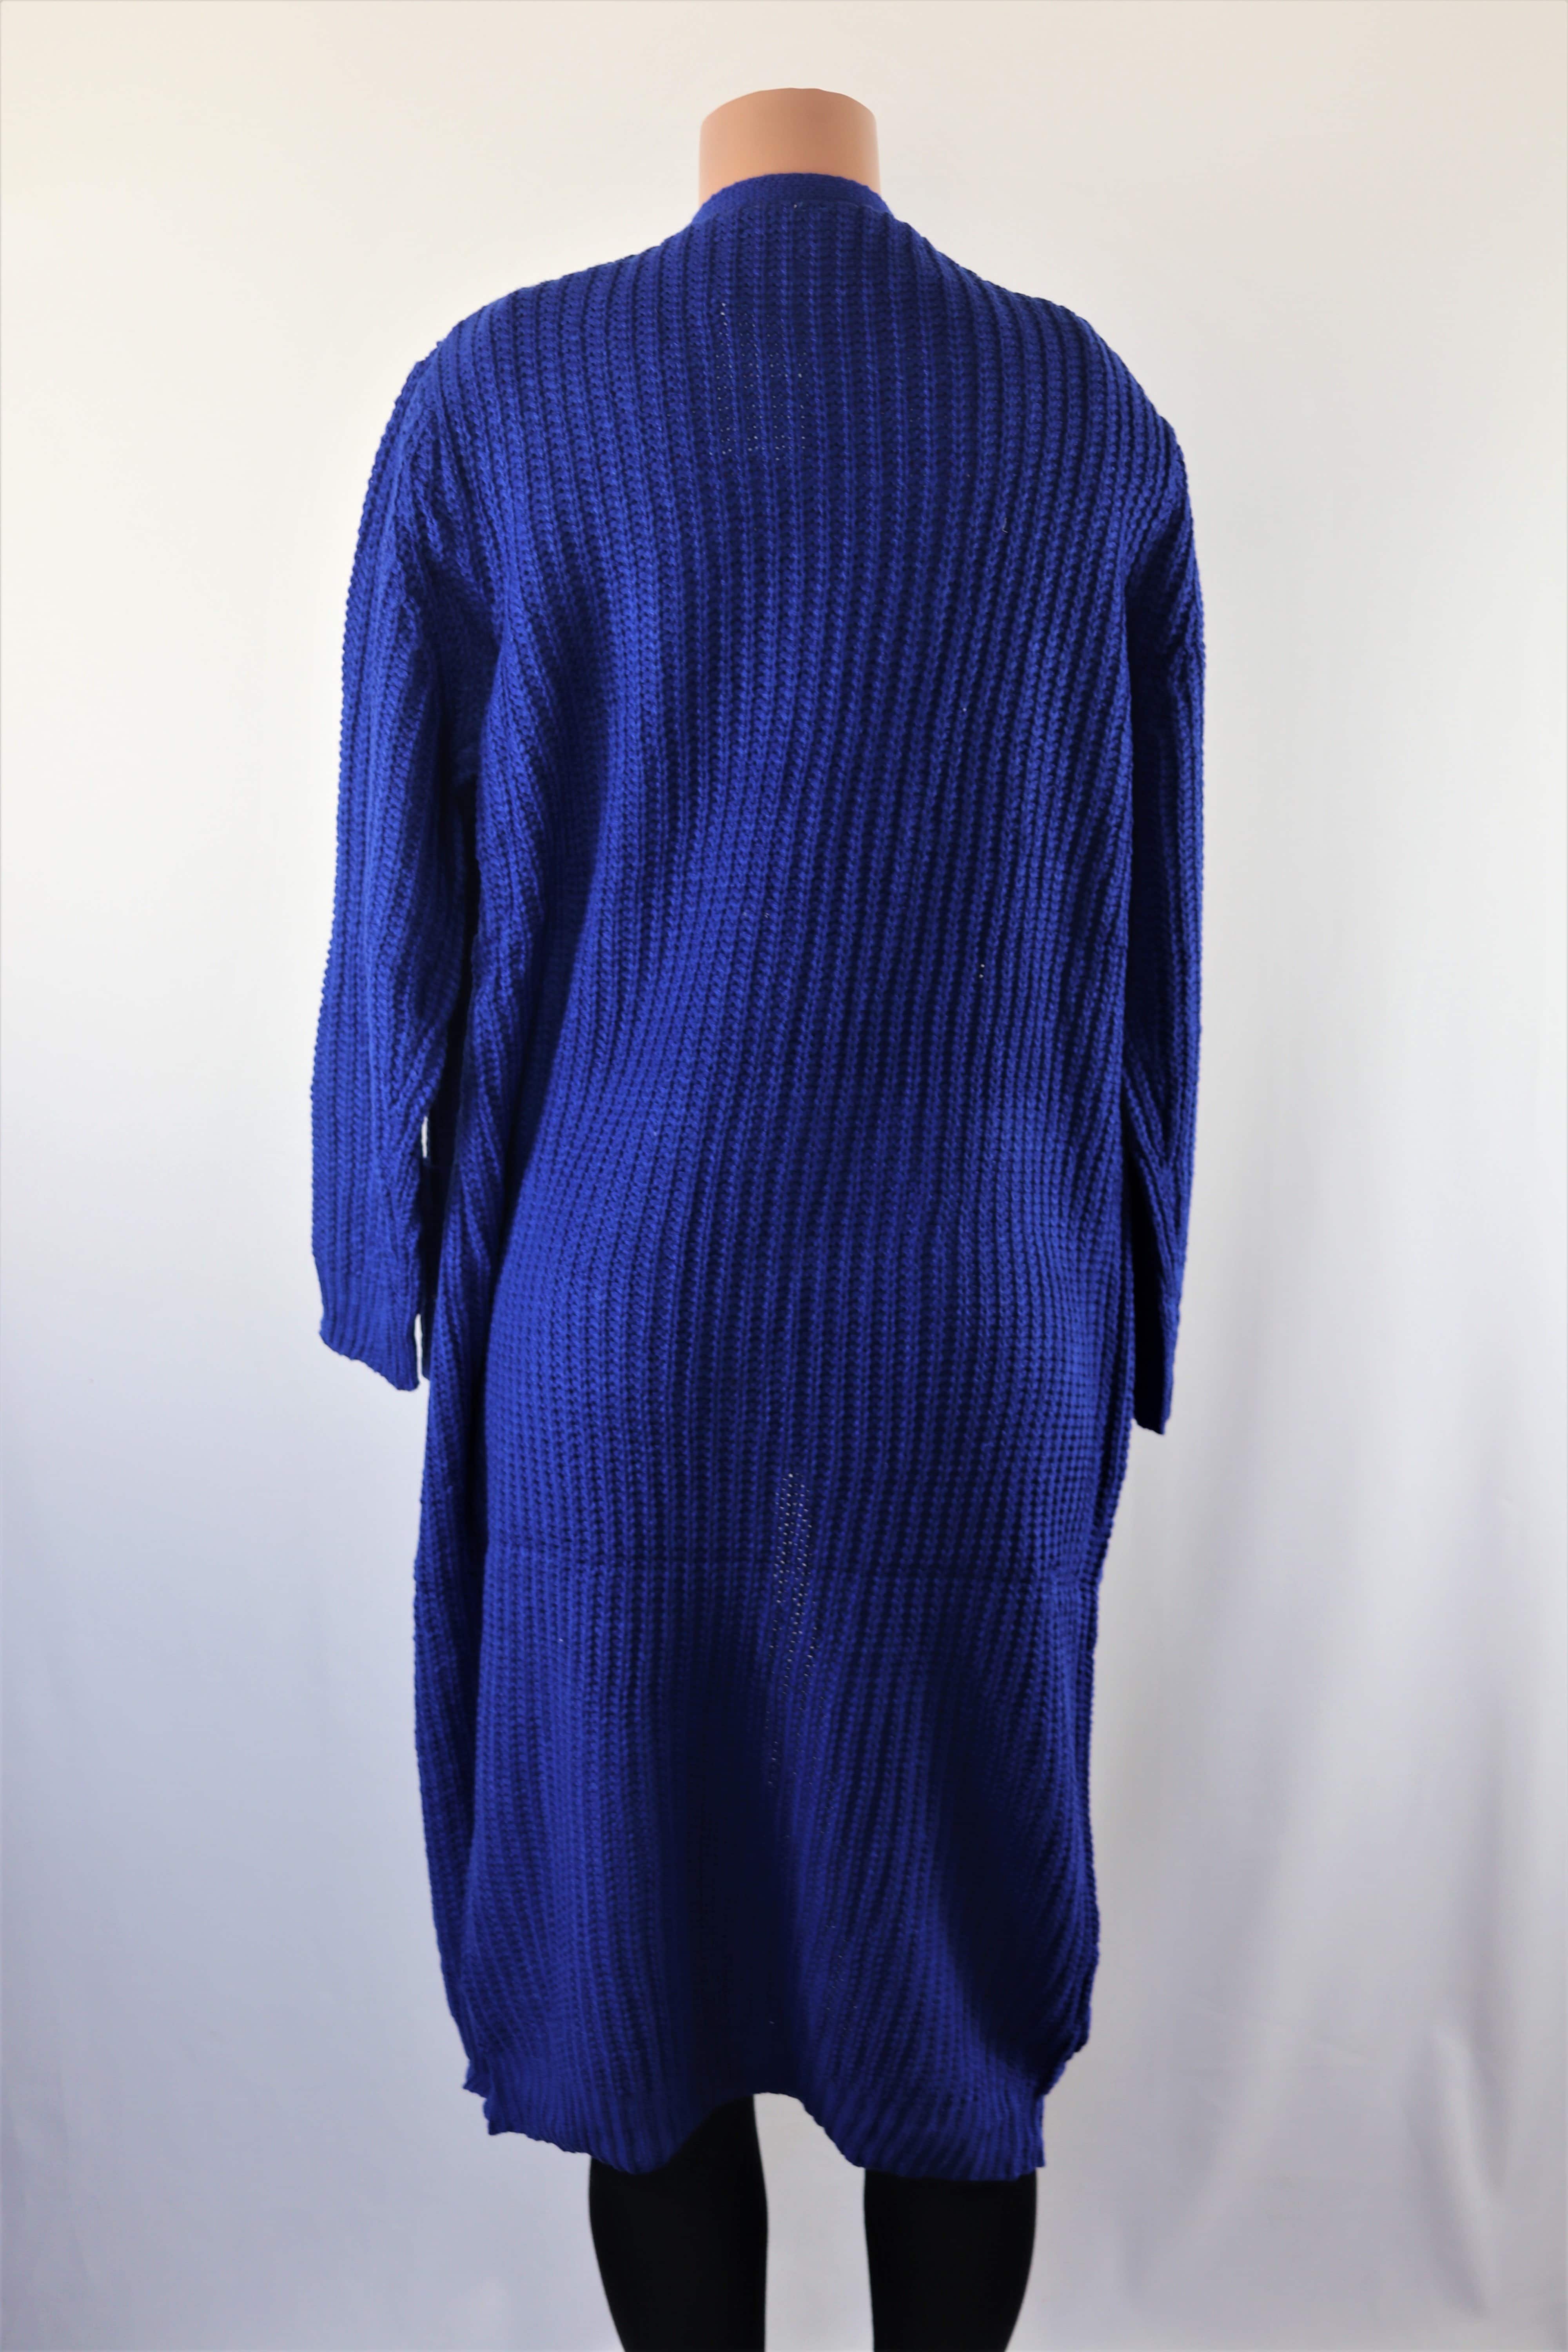 Blue Duster - Blue long sleeve knitted cardigan duster with pocket detail.